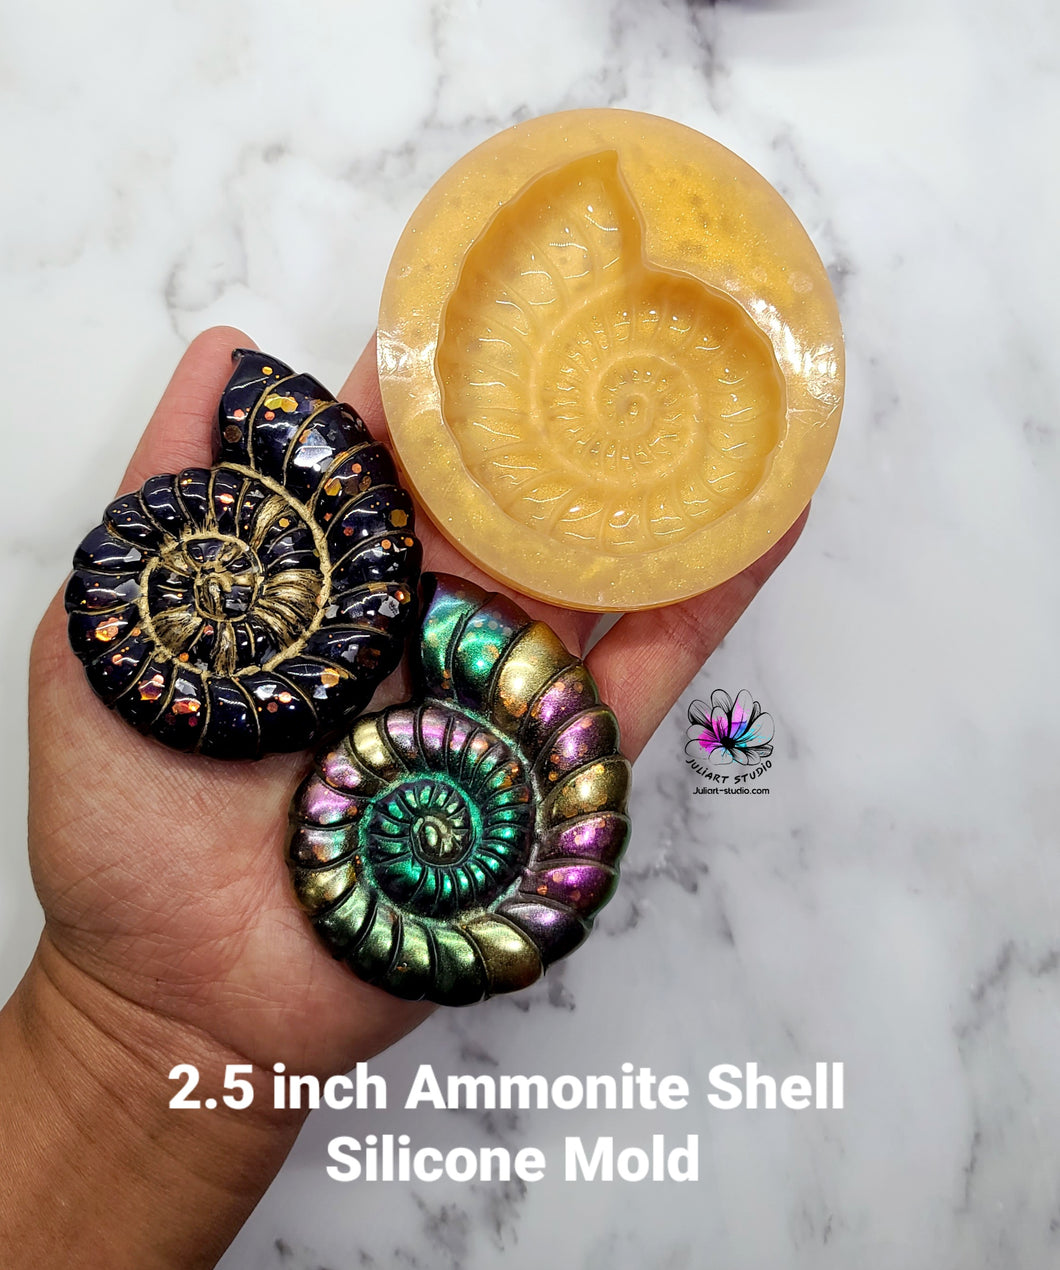 2.5 inch Ammonite Shell Silicone Mold for Resin